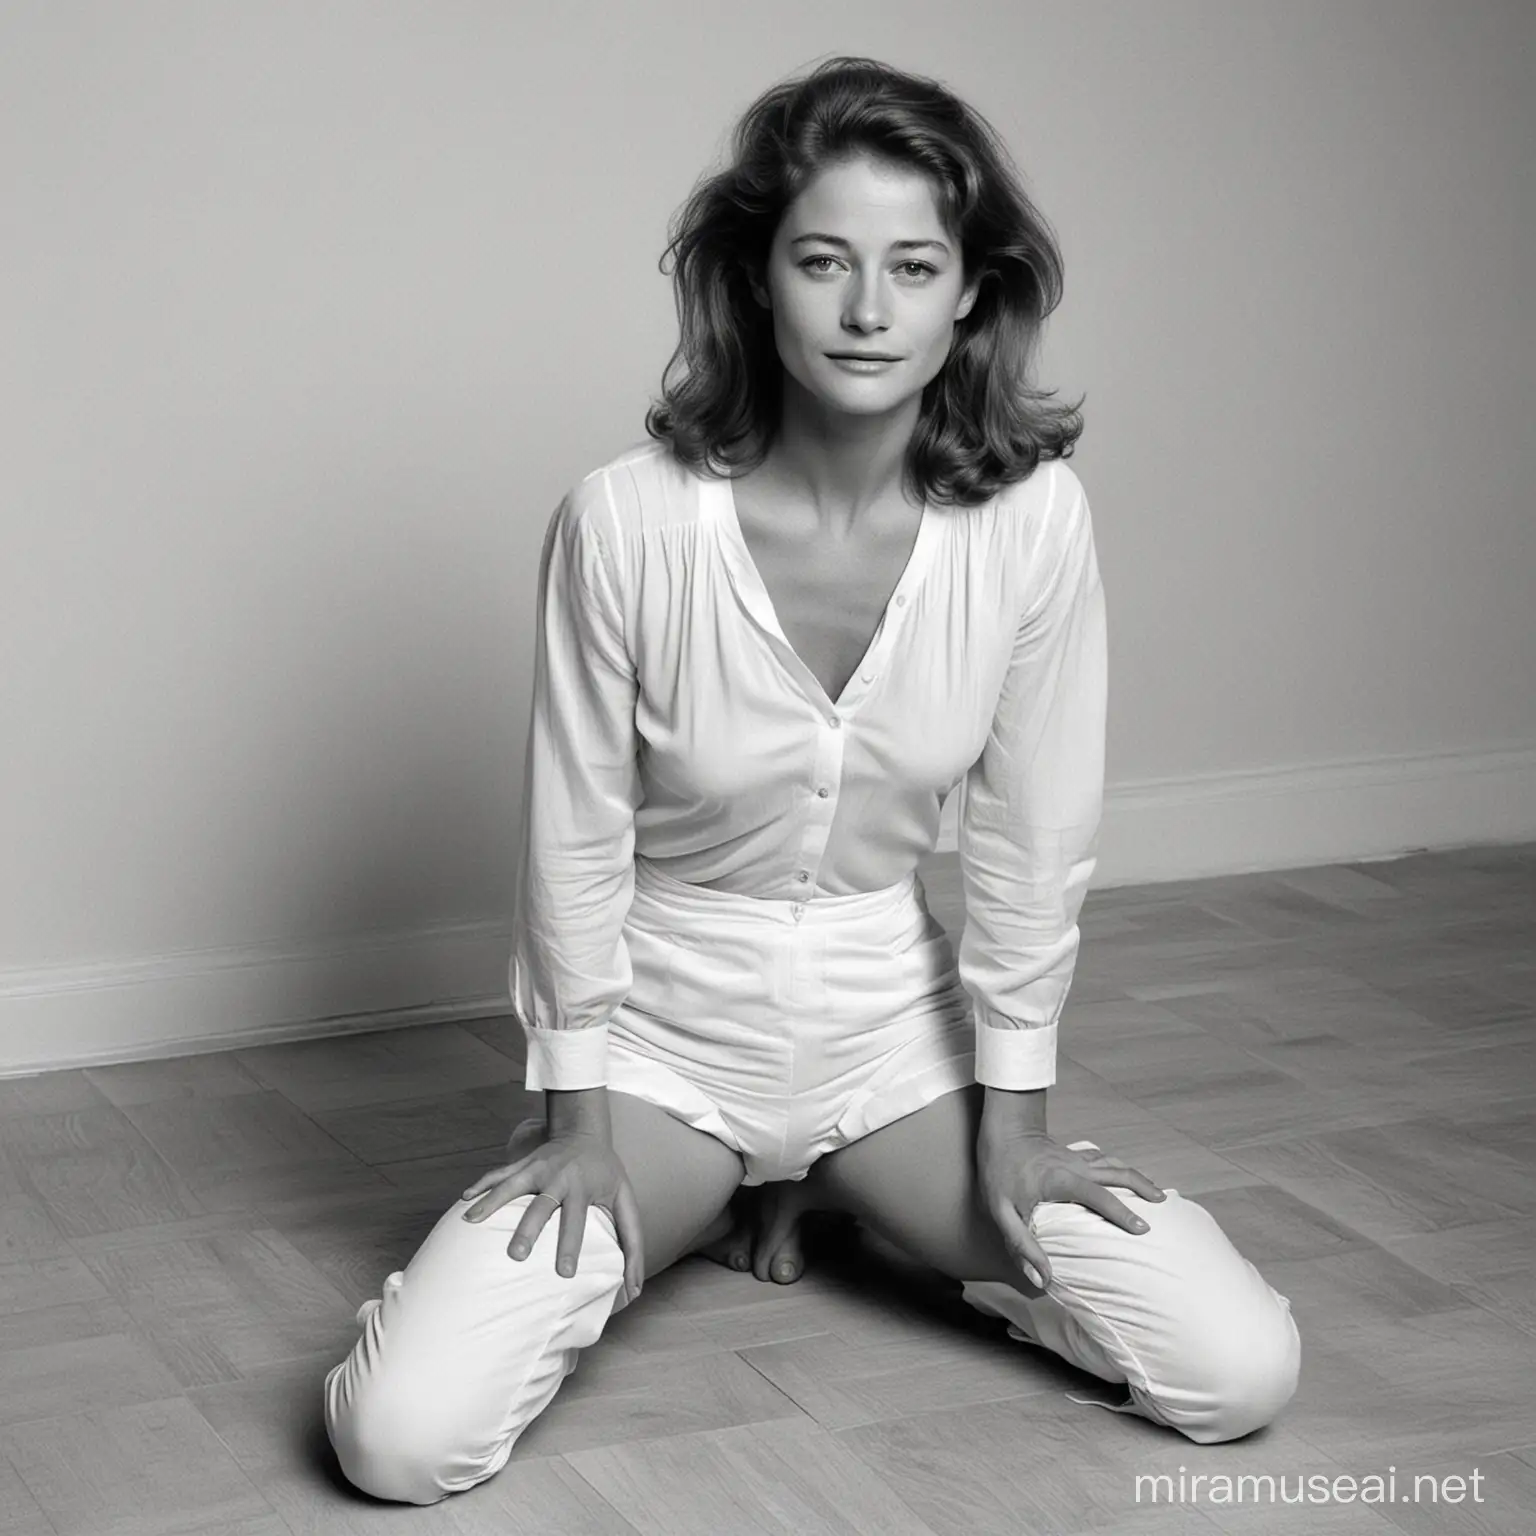 Young Charlotte Rampling Poses on Her Knees with Legs Spread Wide